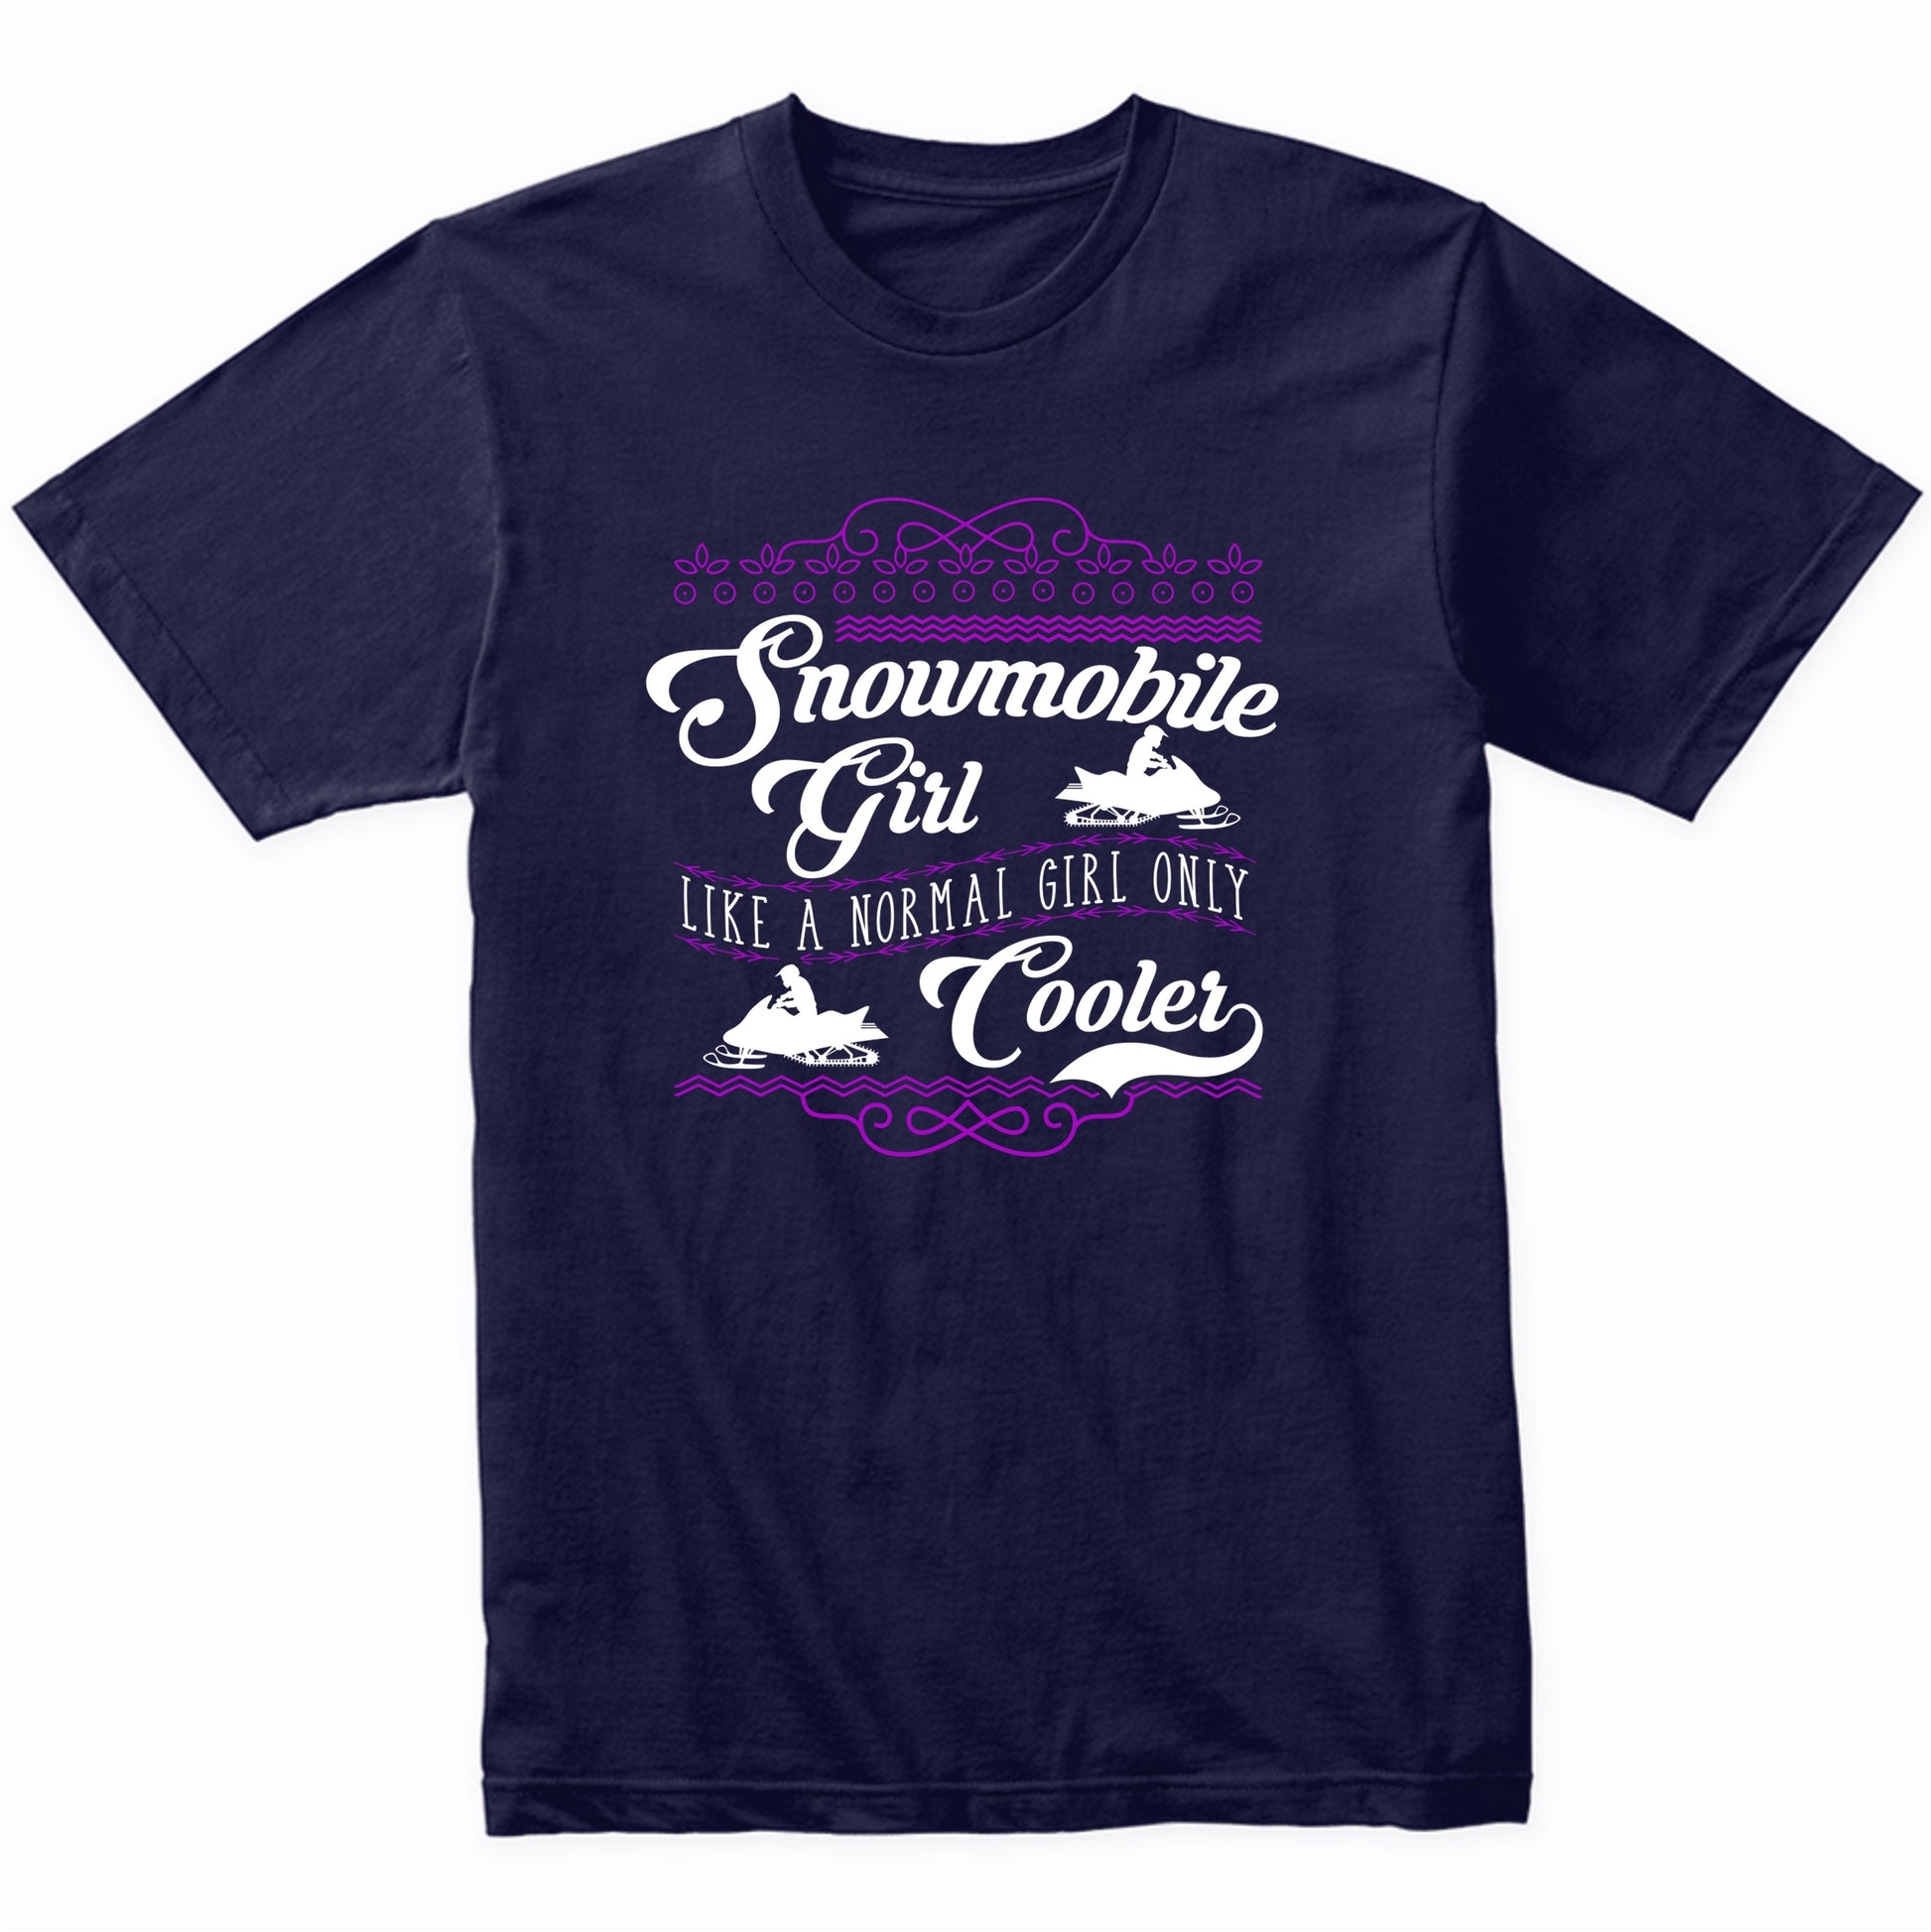 Snowmobile Girl Like A Normal Girl Only Cooler Funny Shirt